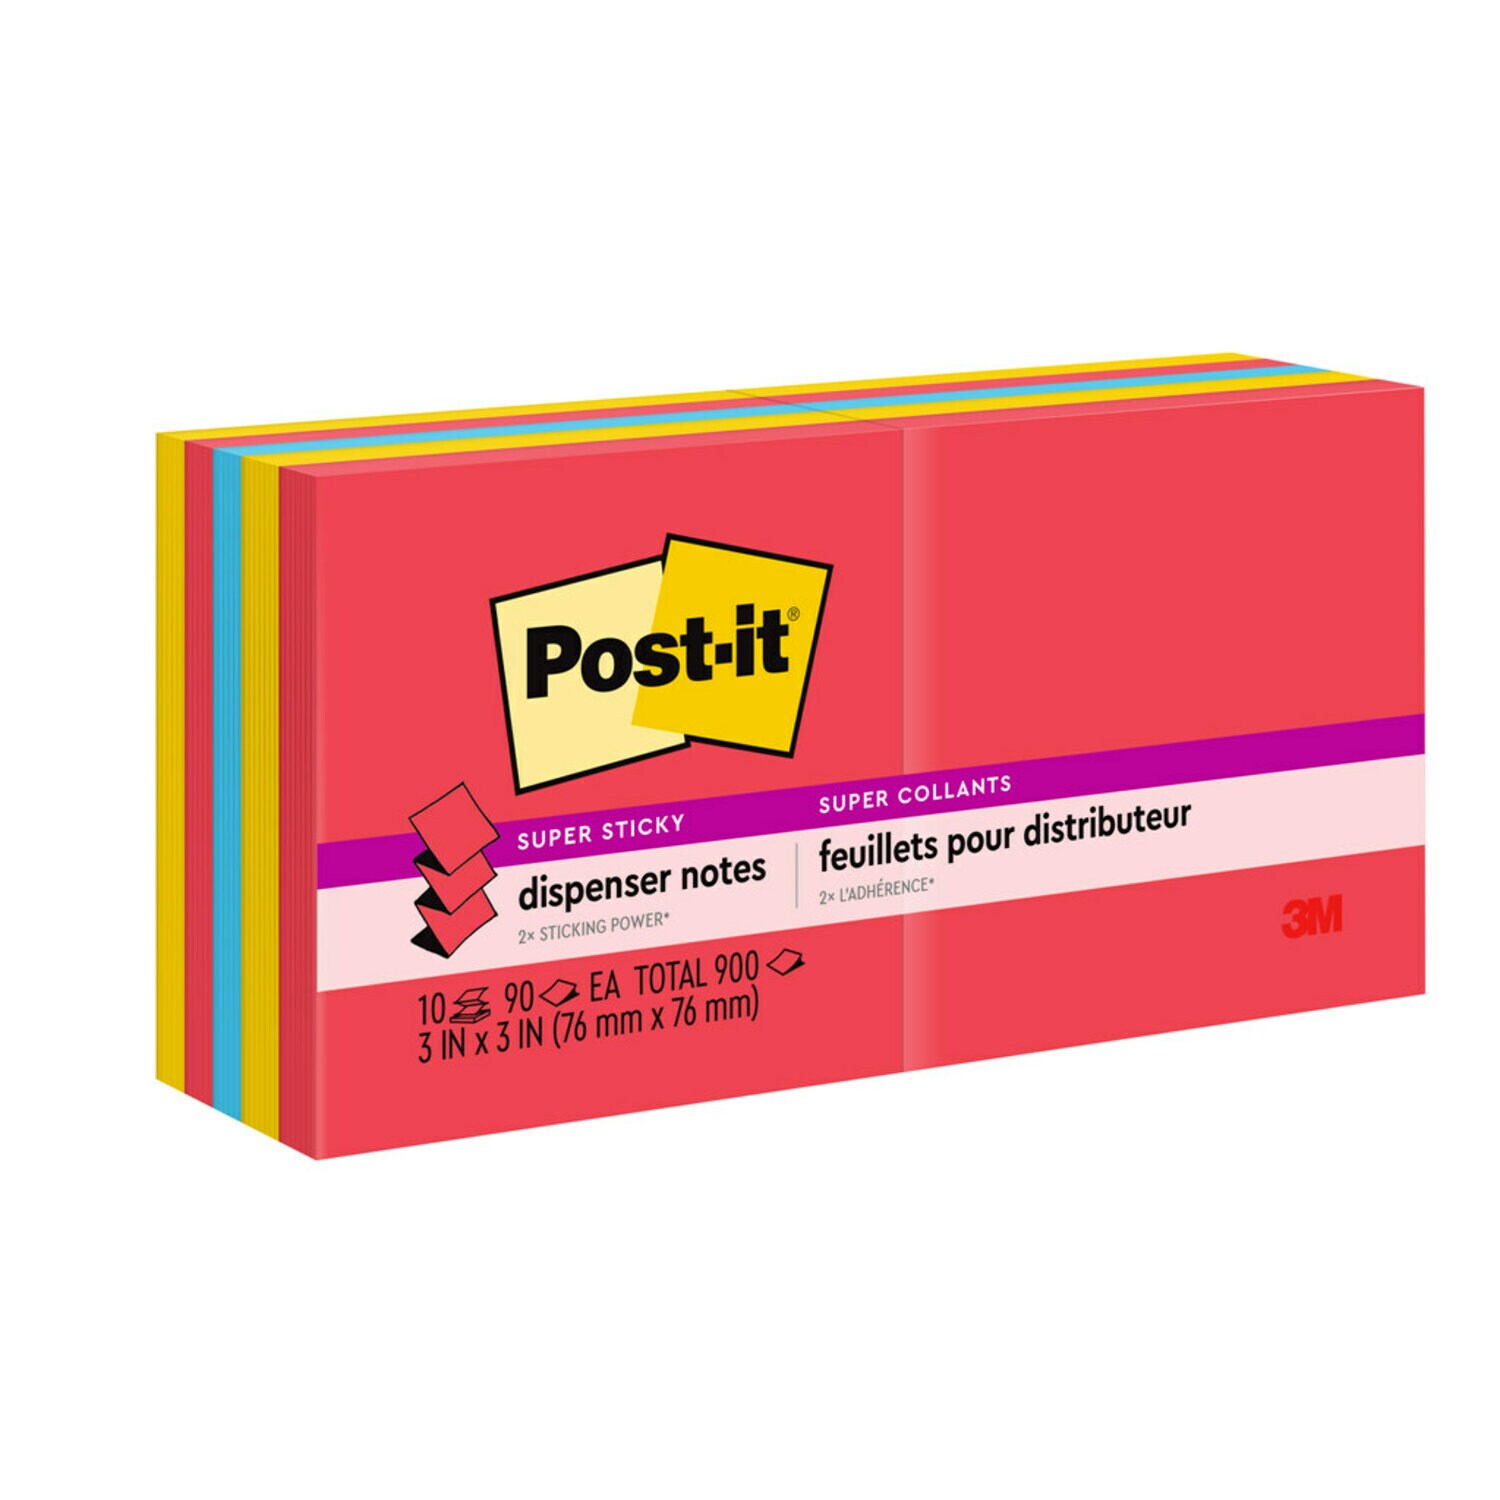 7100104266 - Post-it Super Sticky Dispenser Pop-up Notes R330-10SSAN, 3 in x 3 in (76 mm x 76 mm)